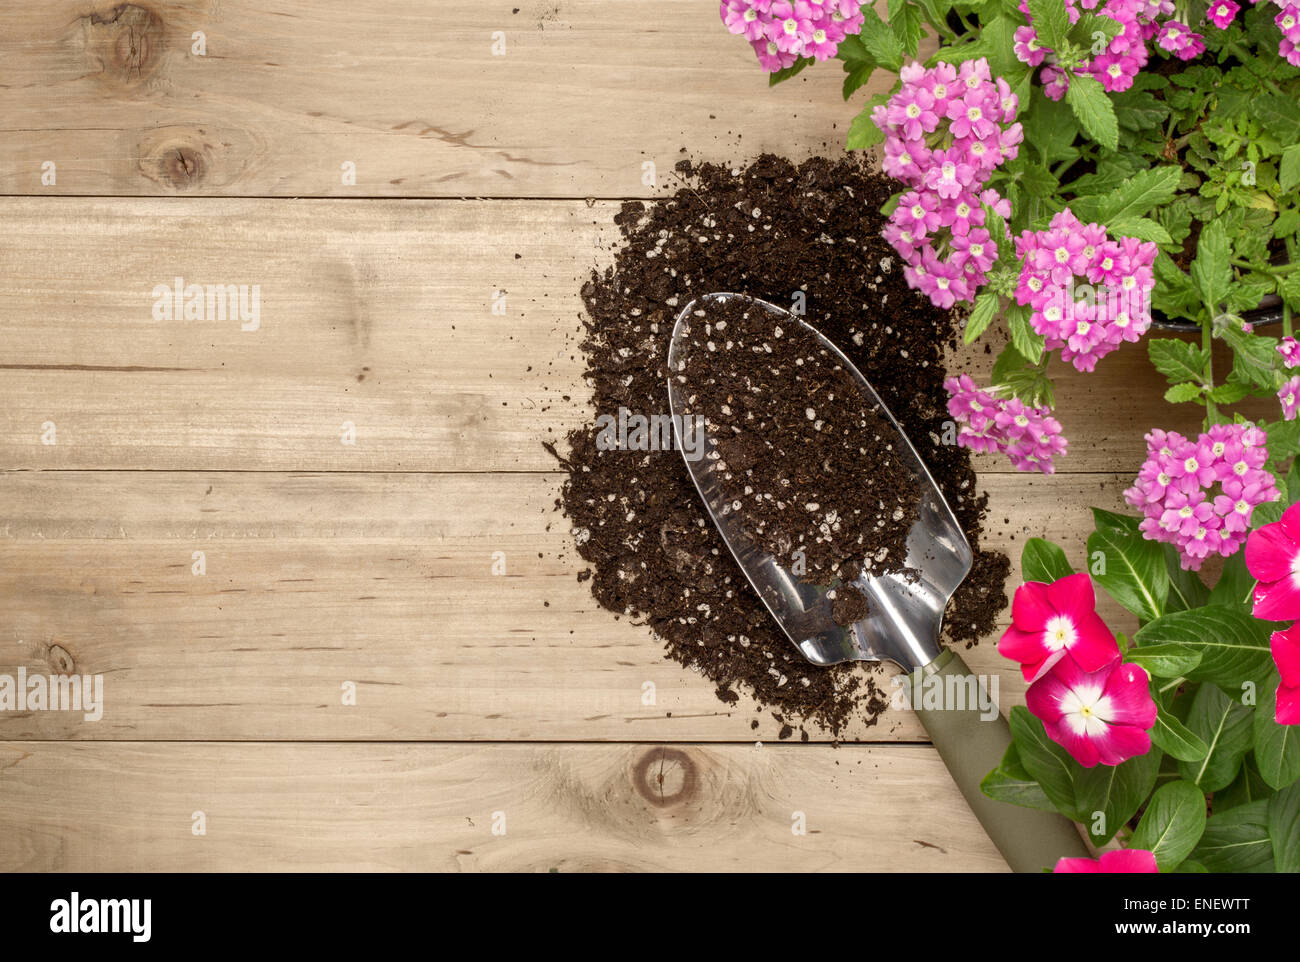 Gardening tools and flower on wooden background Stock Photo